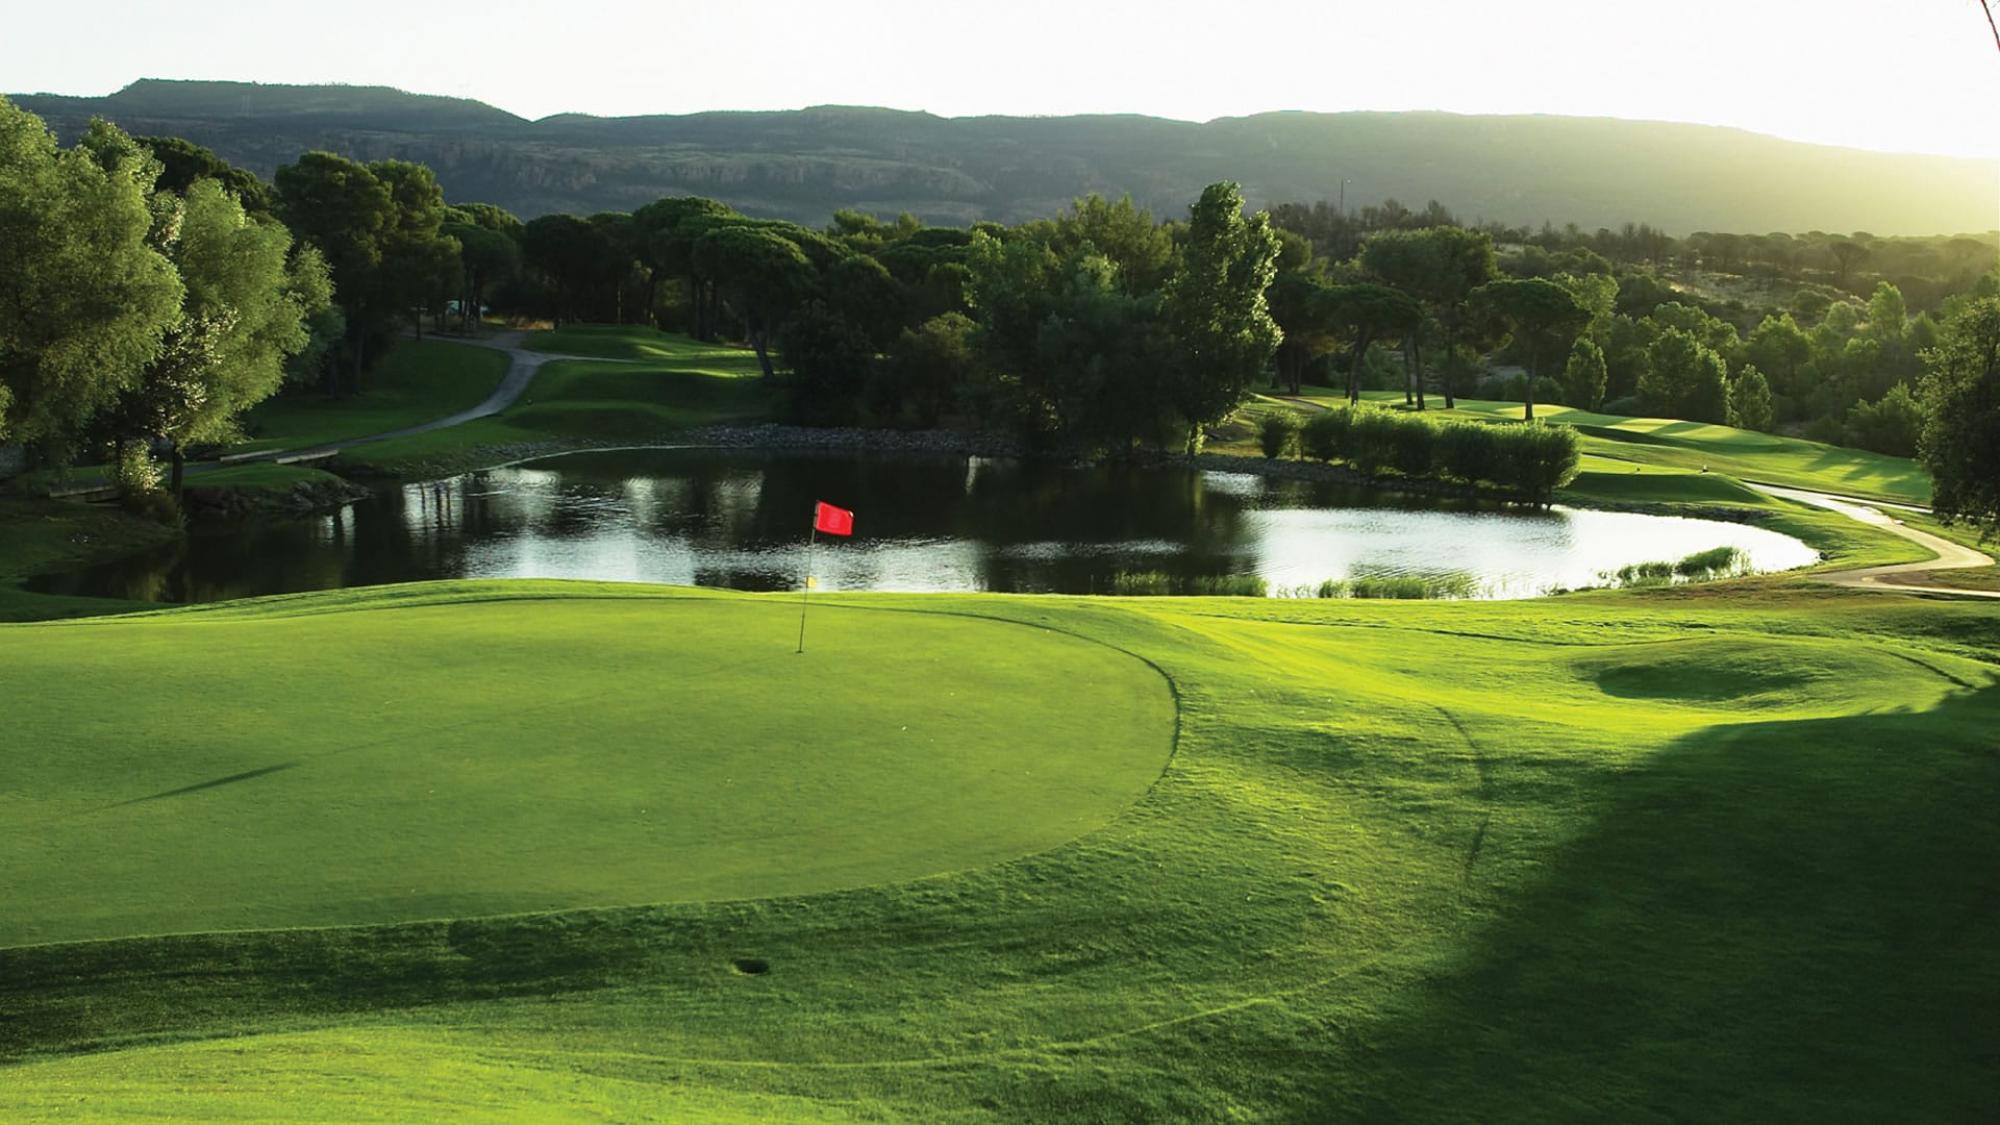 Saint Endreol Golf Course provides among the leading golf course near South of France